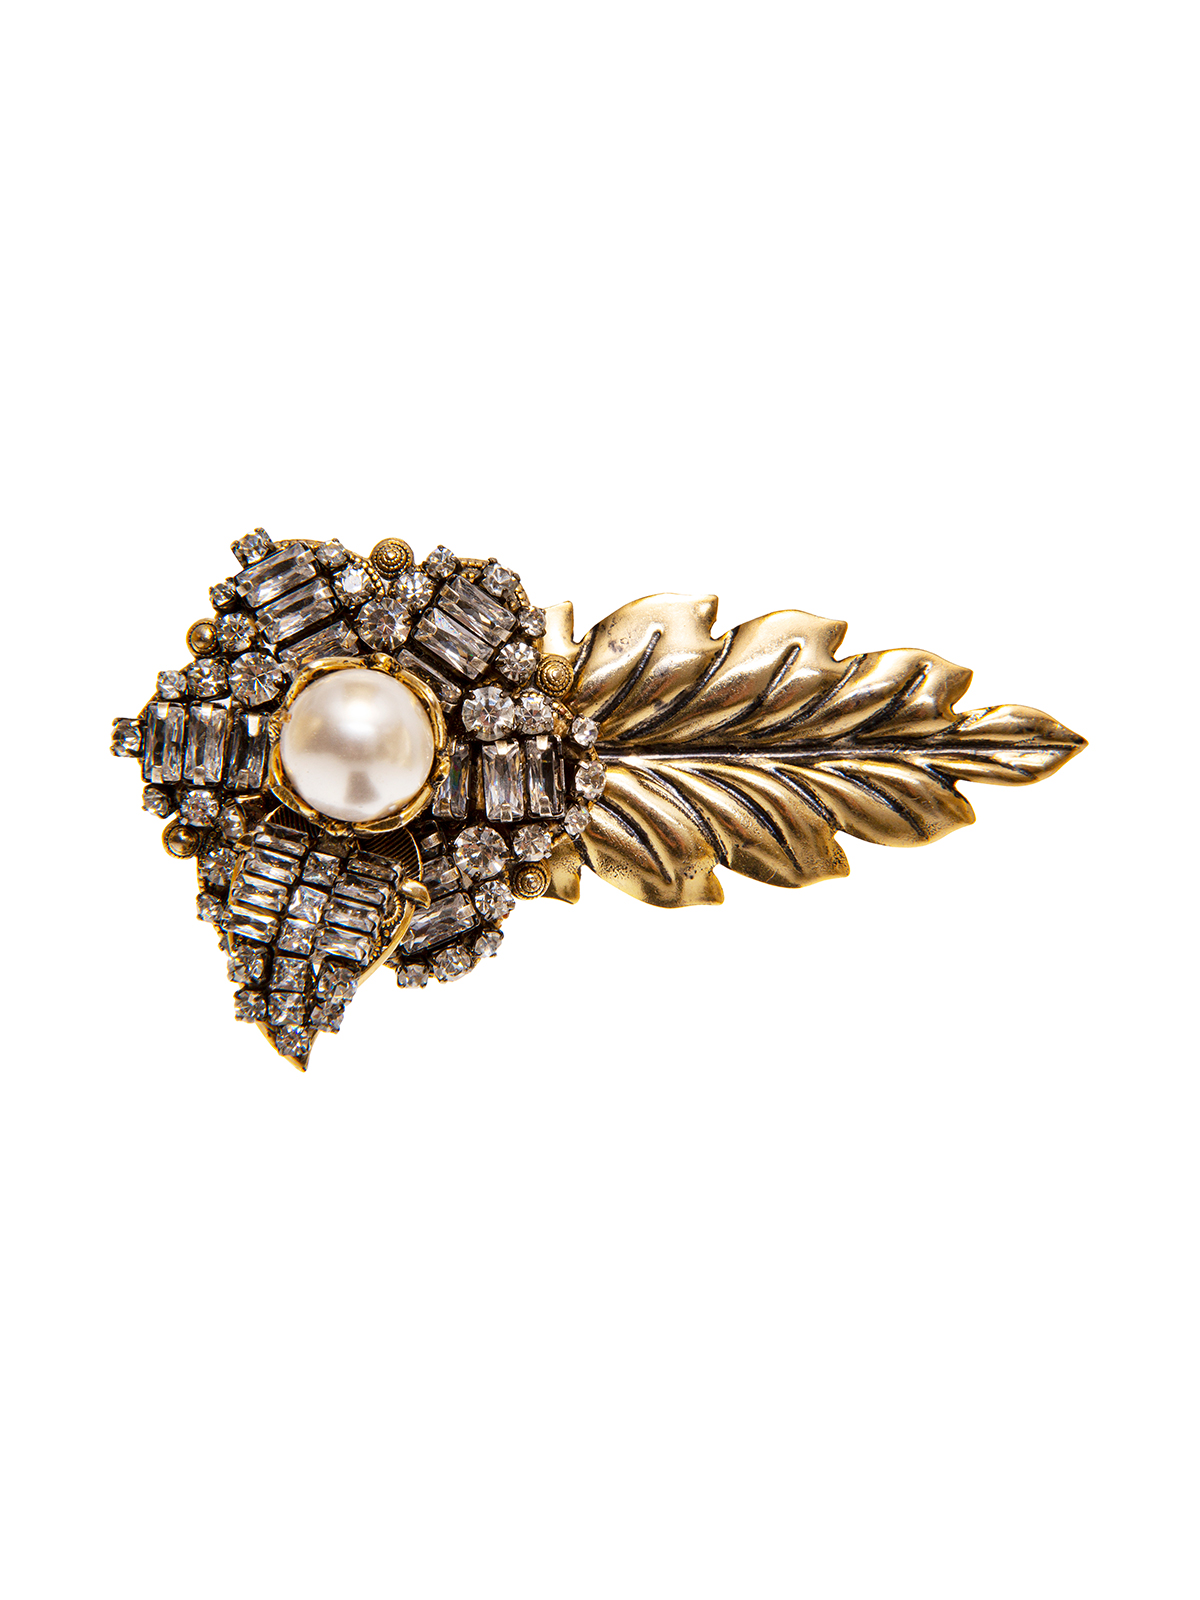 Flower brooch with crystal embroidery and central pearl